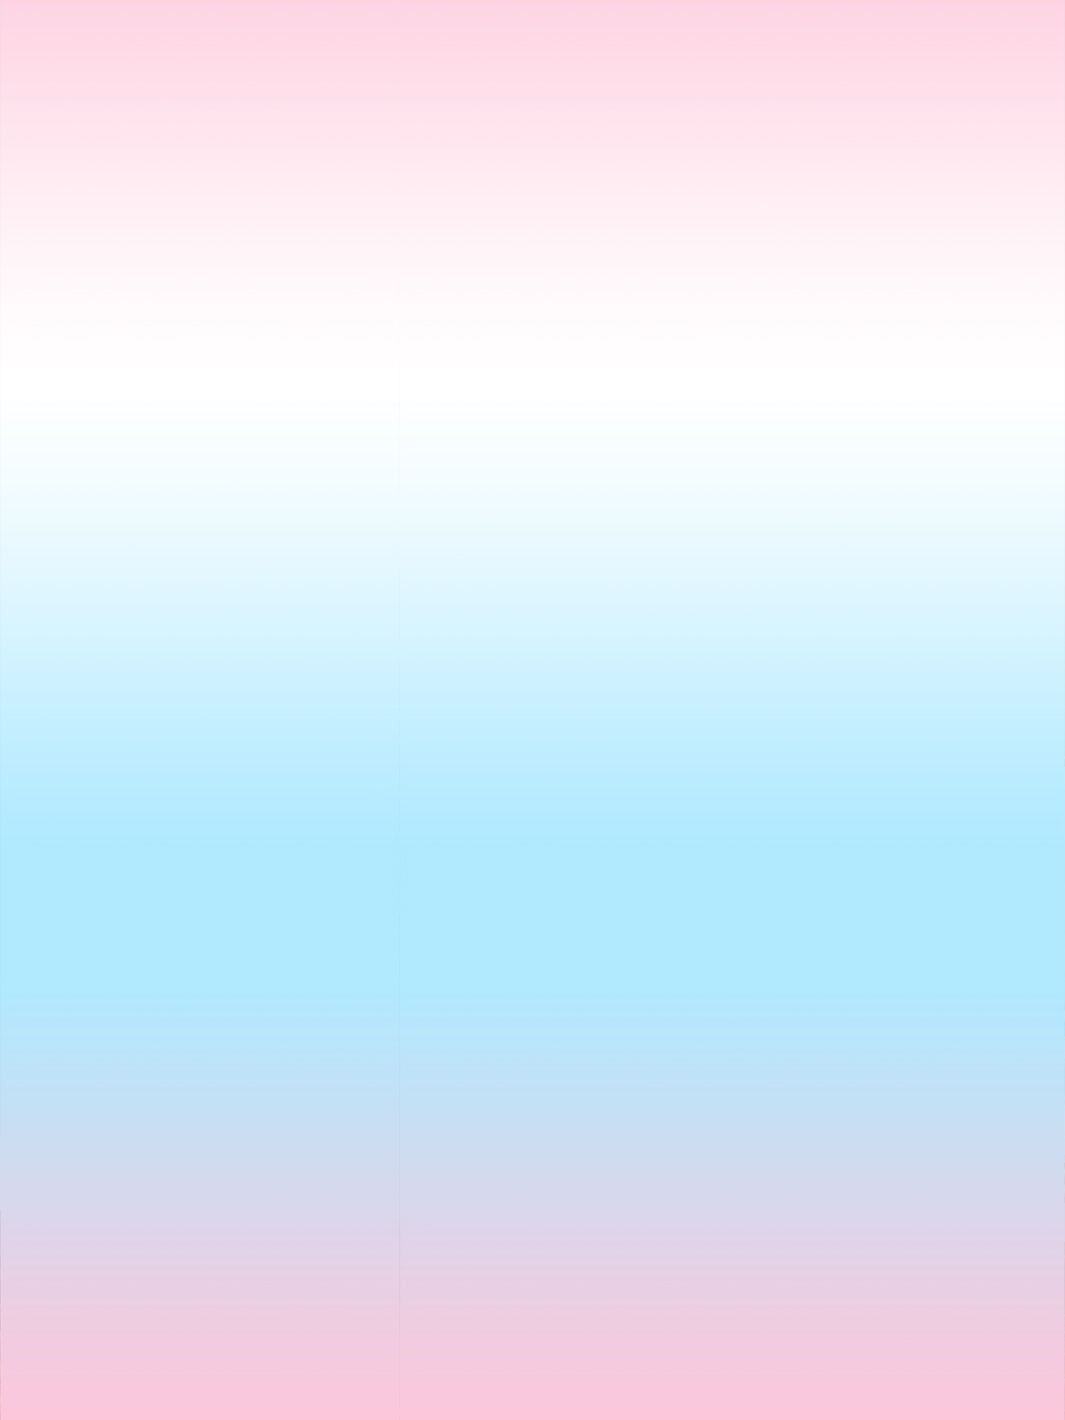 'Barbie™ Land Ombre' Wallpaper by Barbie™ - Pink / Blue